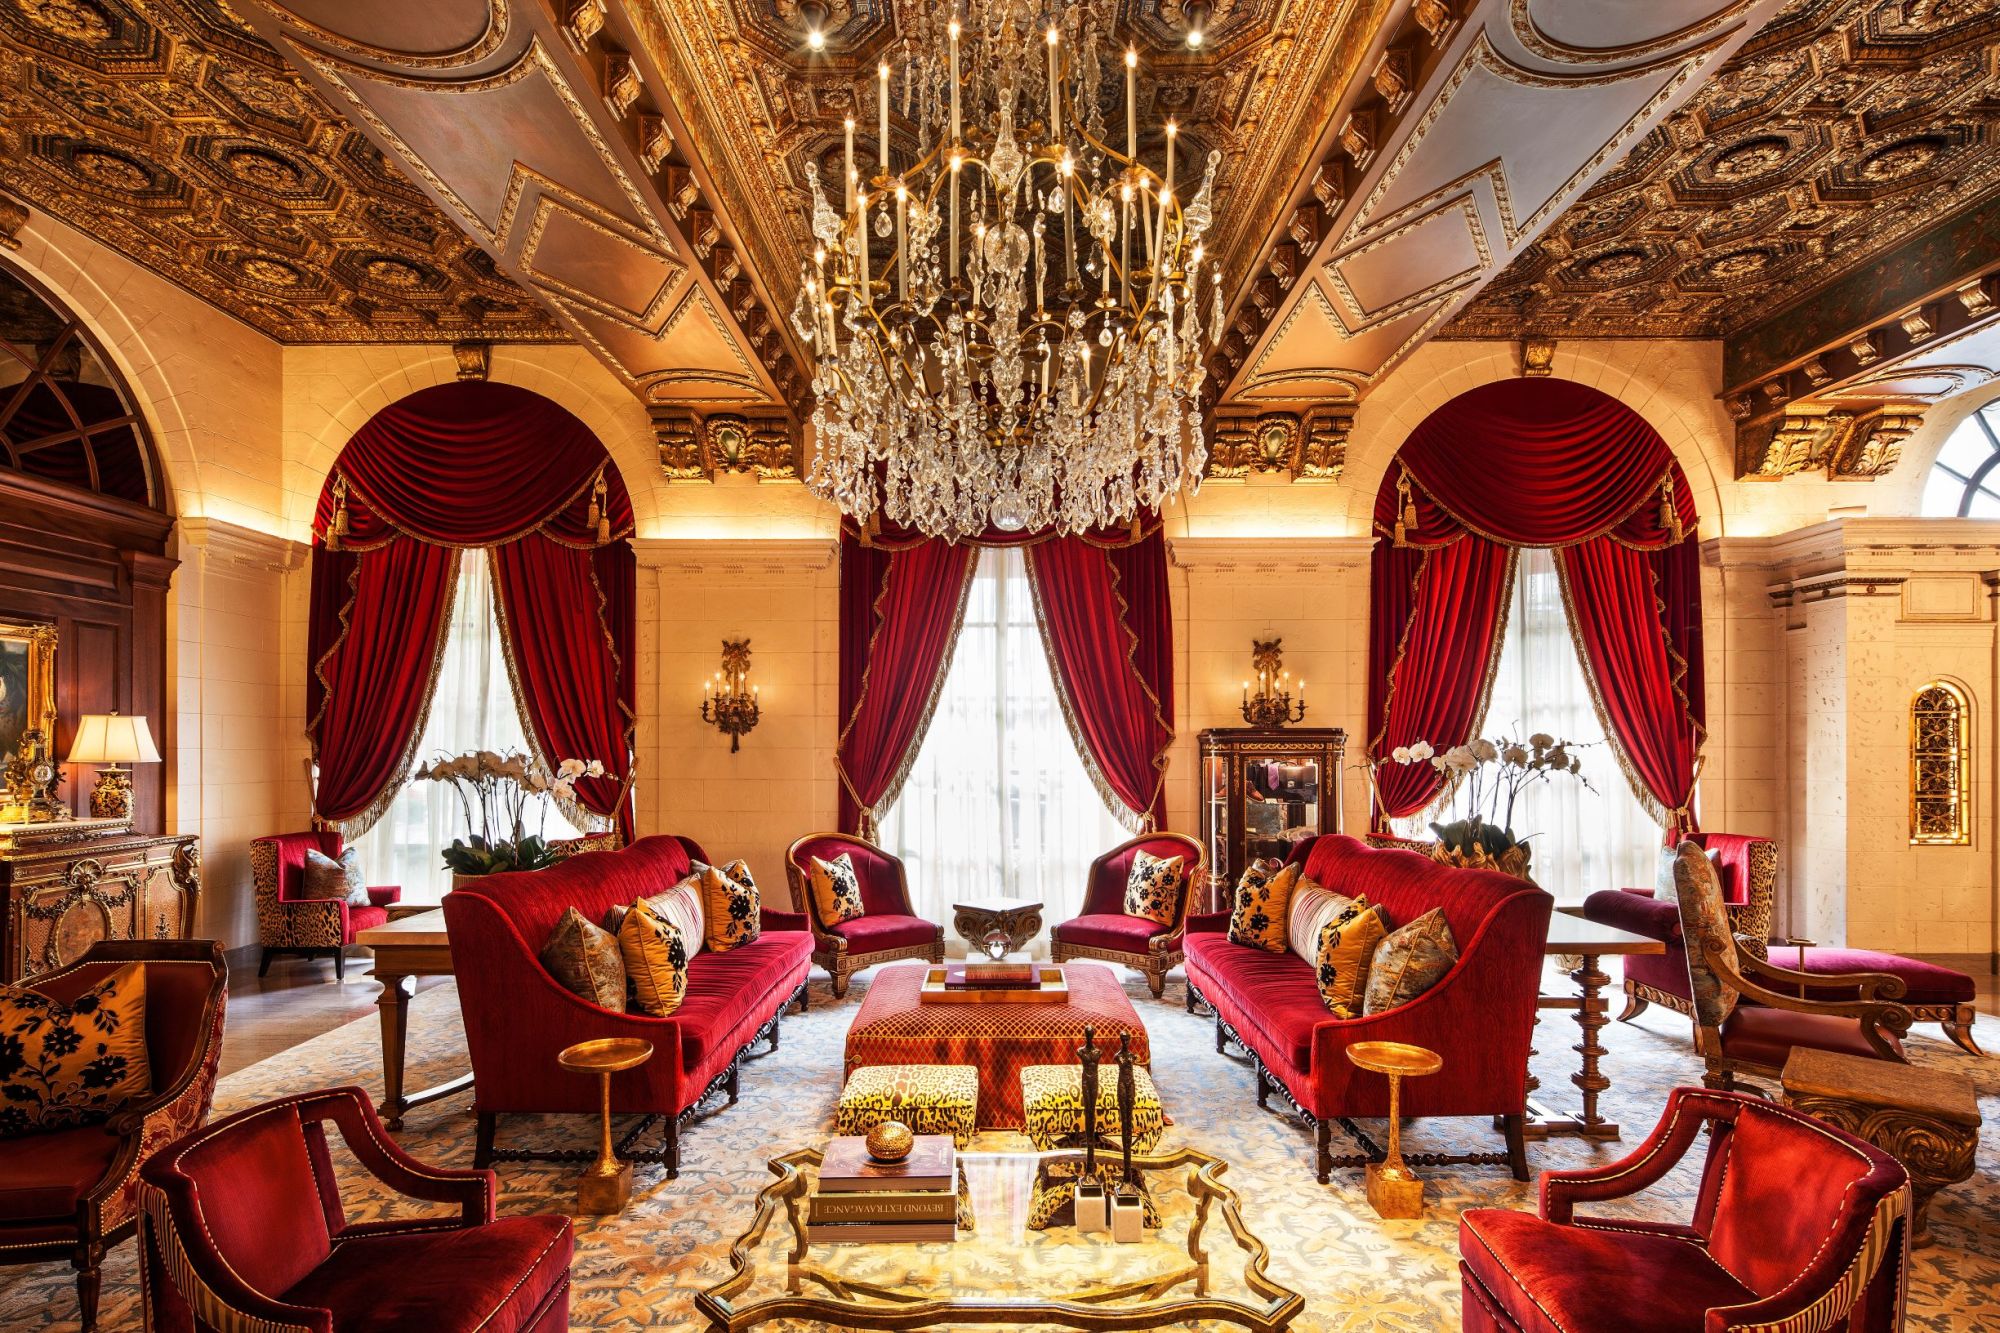 august-exclusives-of-the-month-from-bali-to-milan-st-regis-dc